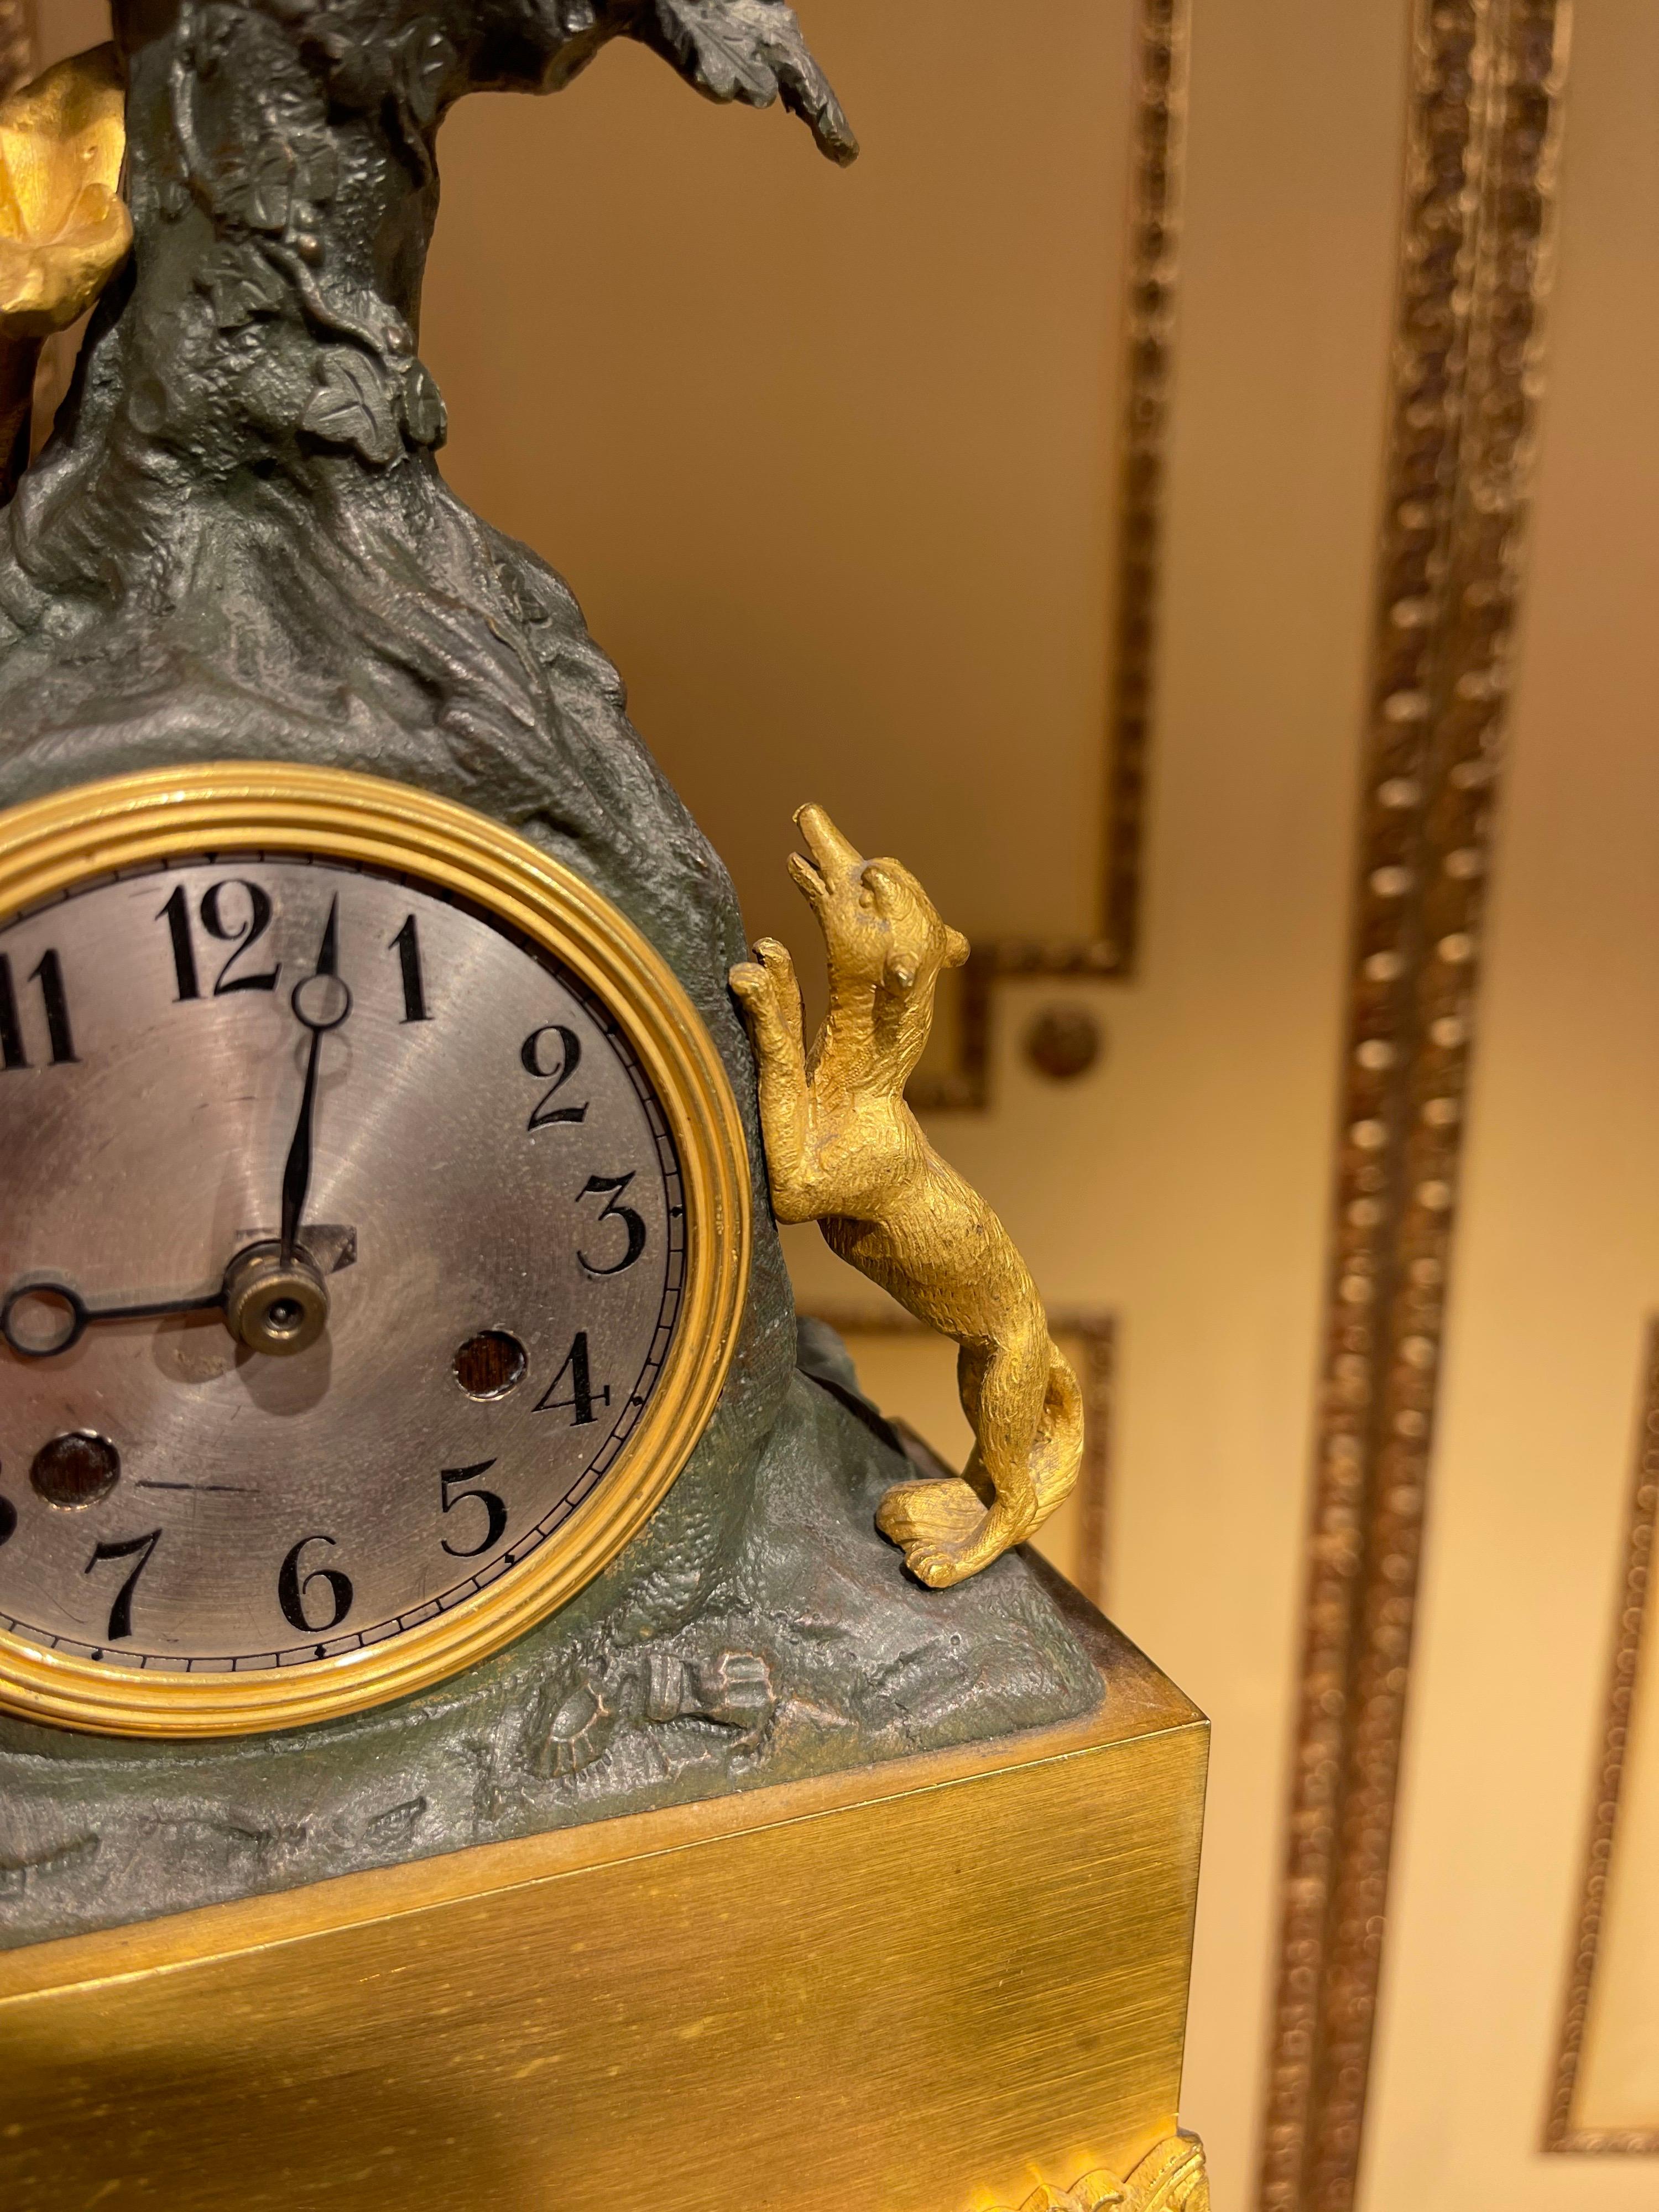 Antique Mantel Clock from around 1850, France, Fire-Gilded For Sale 3